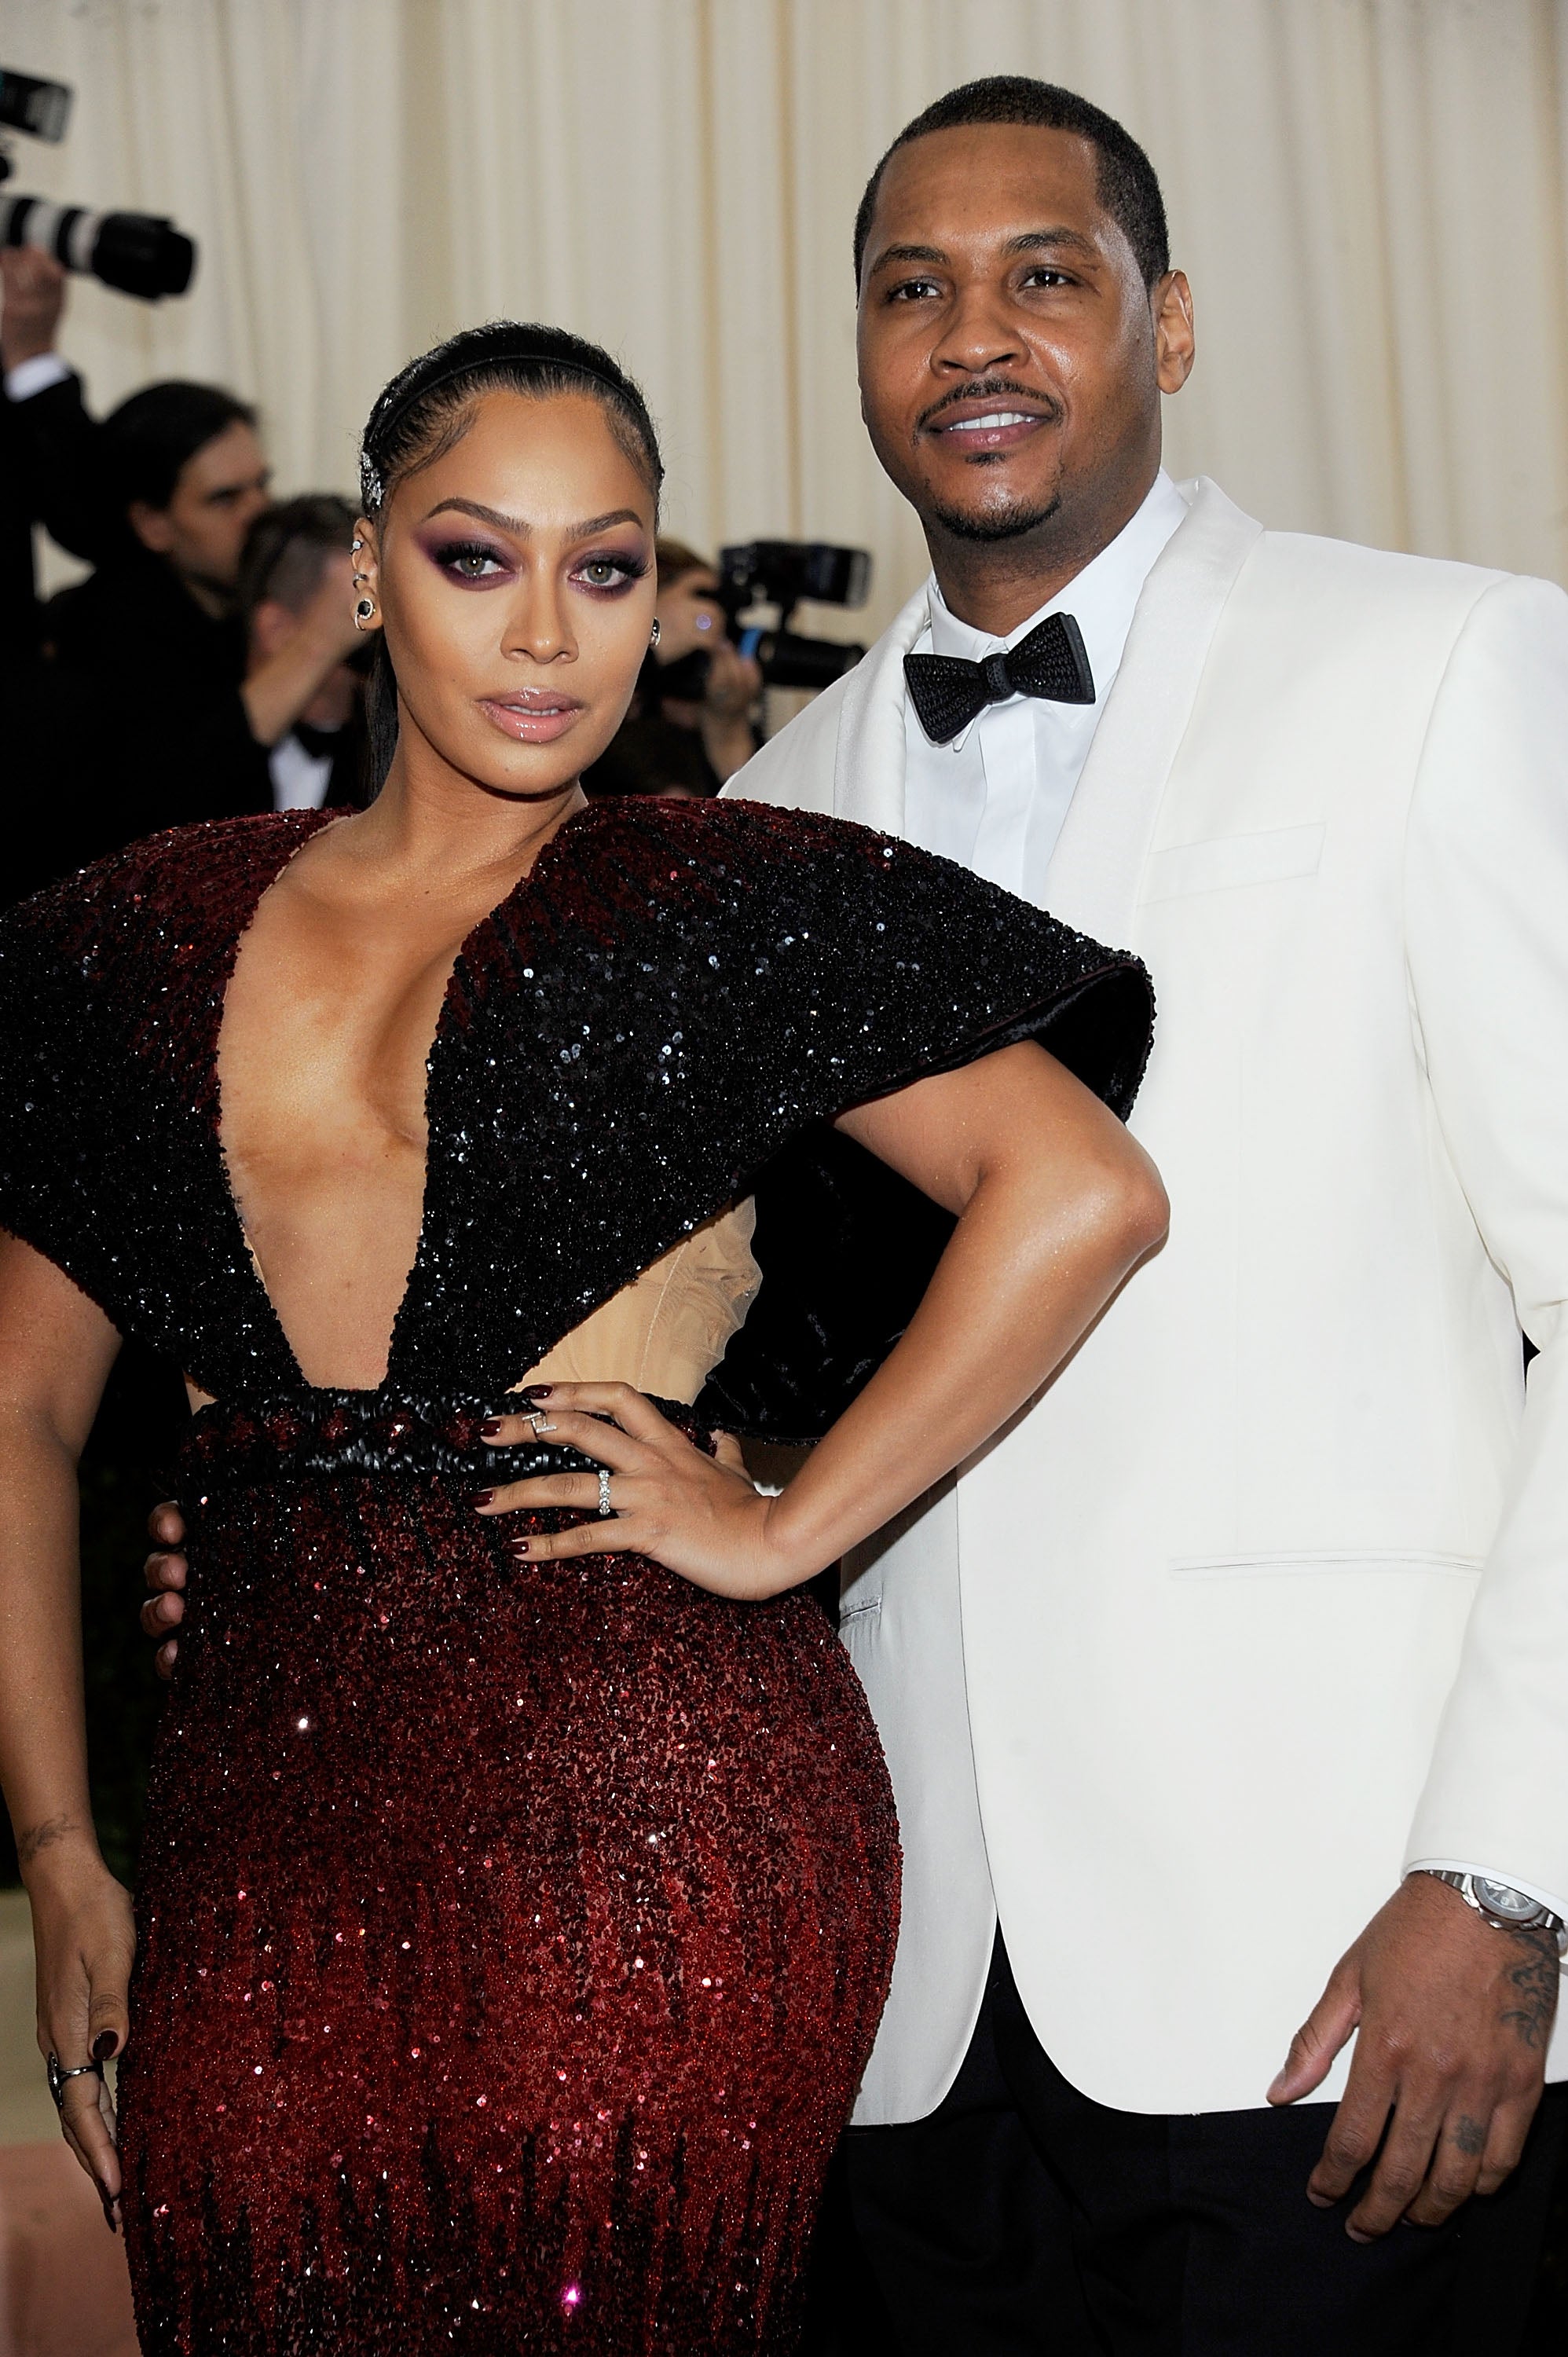 A Look Back At La La And Carmelo Anthony During Happier Times
